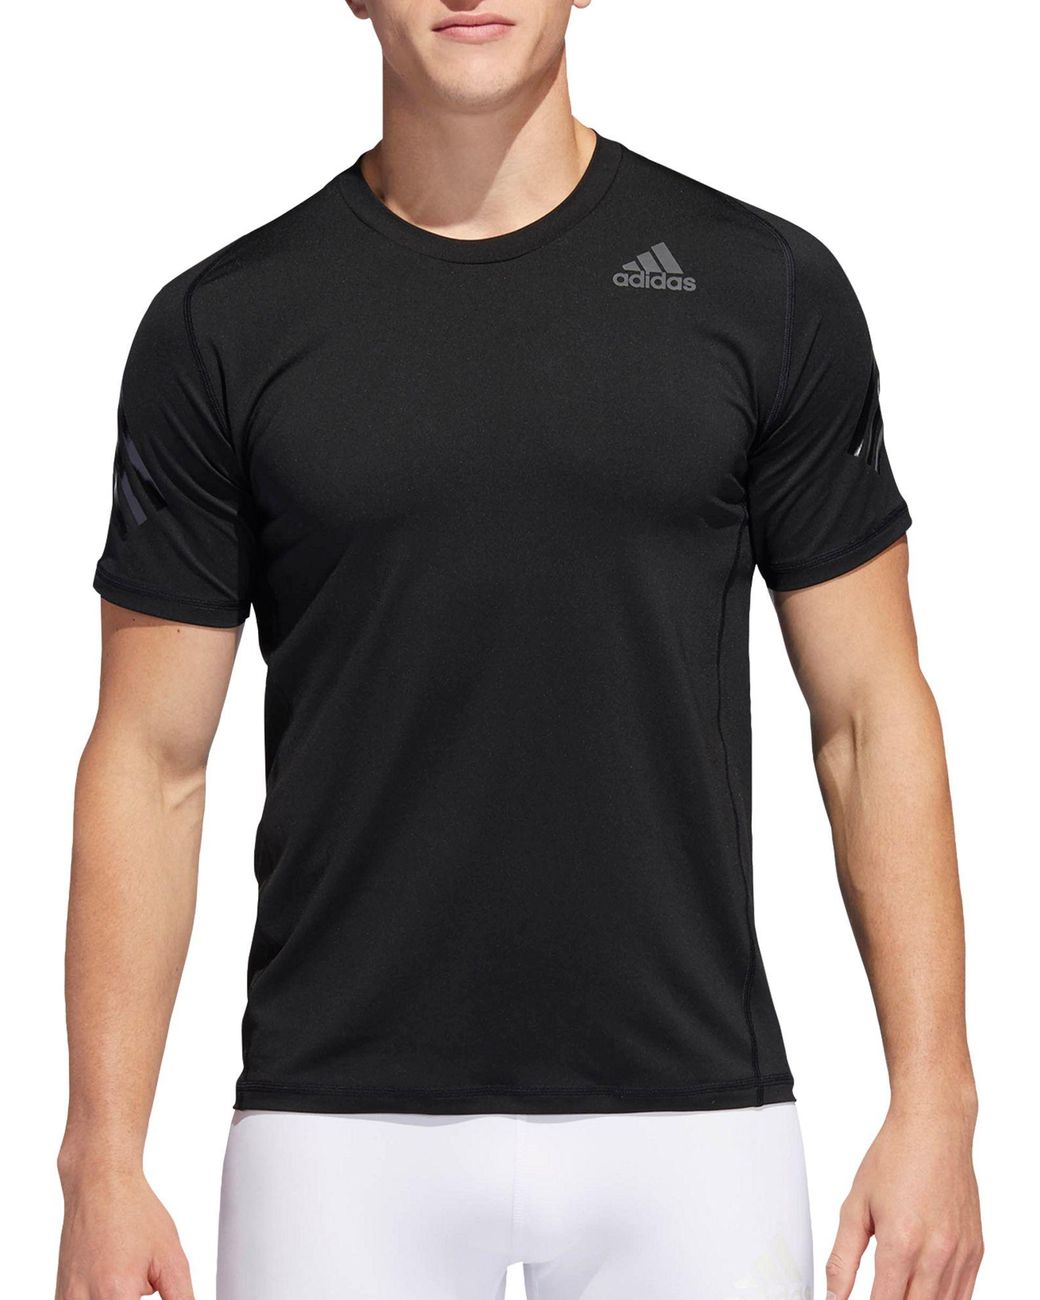 adidas Alphaskin Sport Fitted Training T-shirt in Black for Men - Lyst